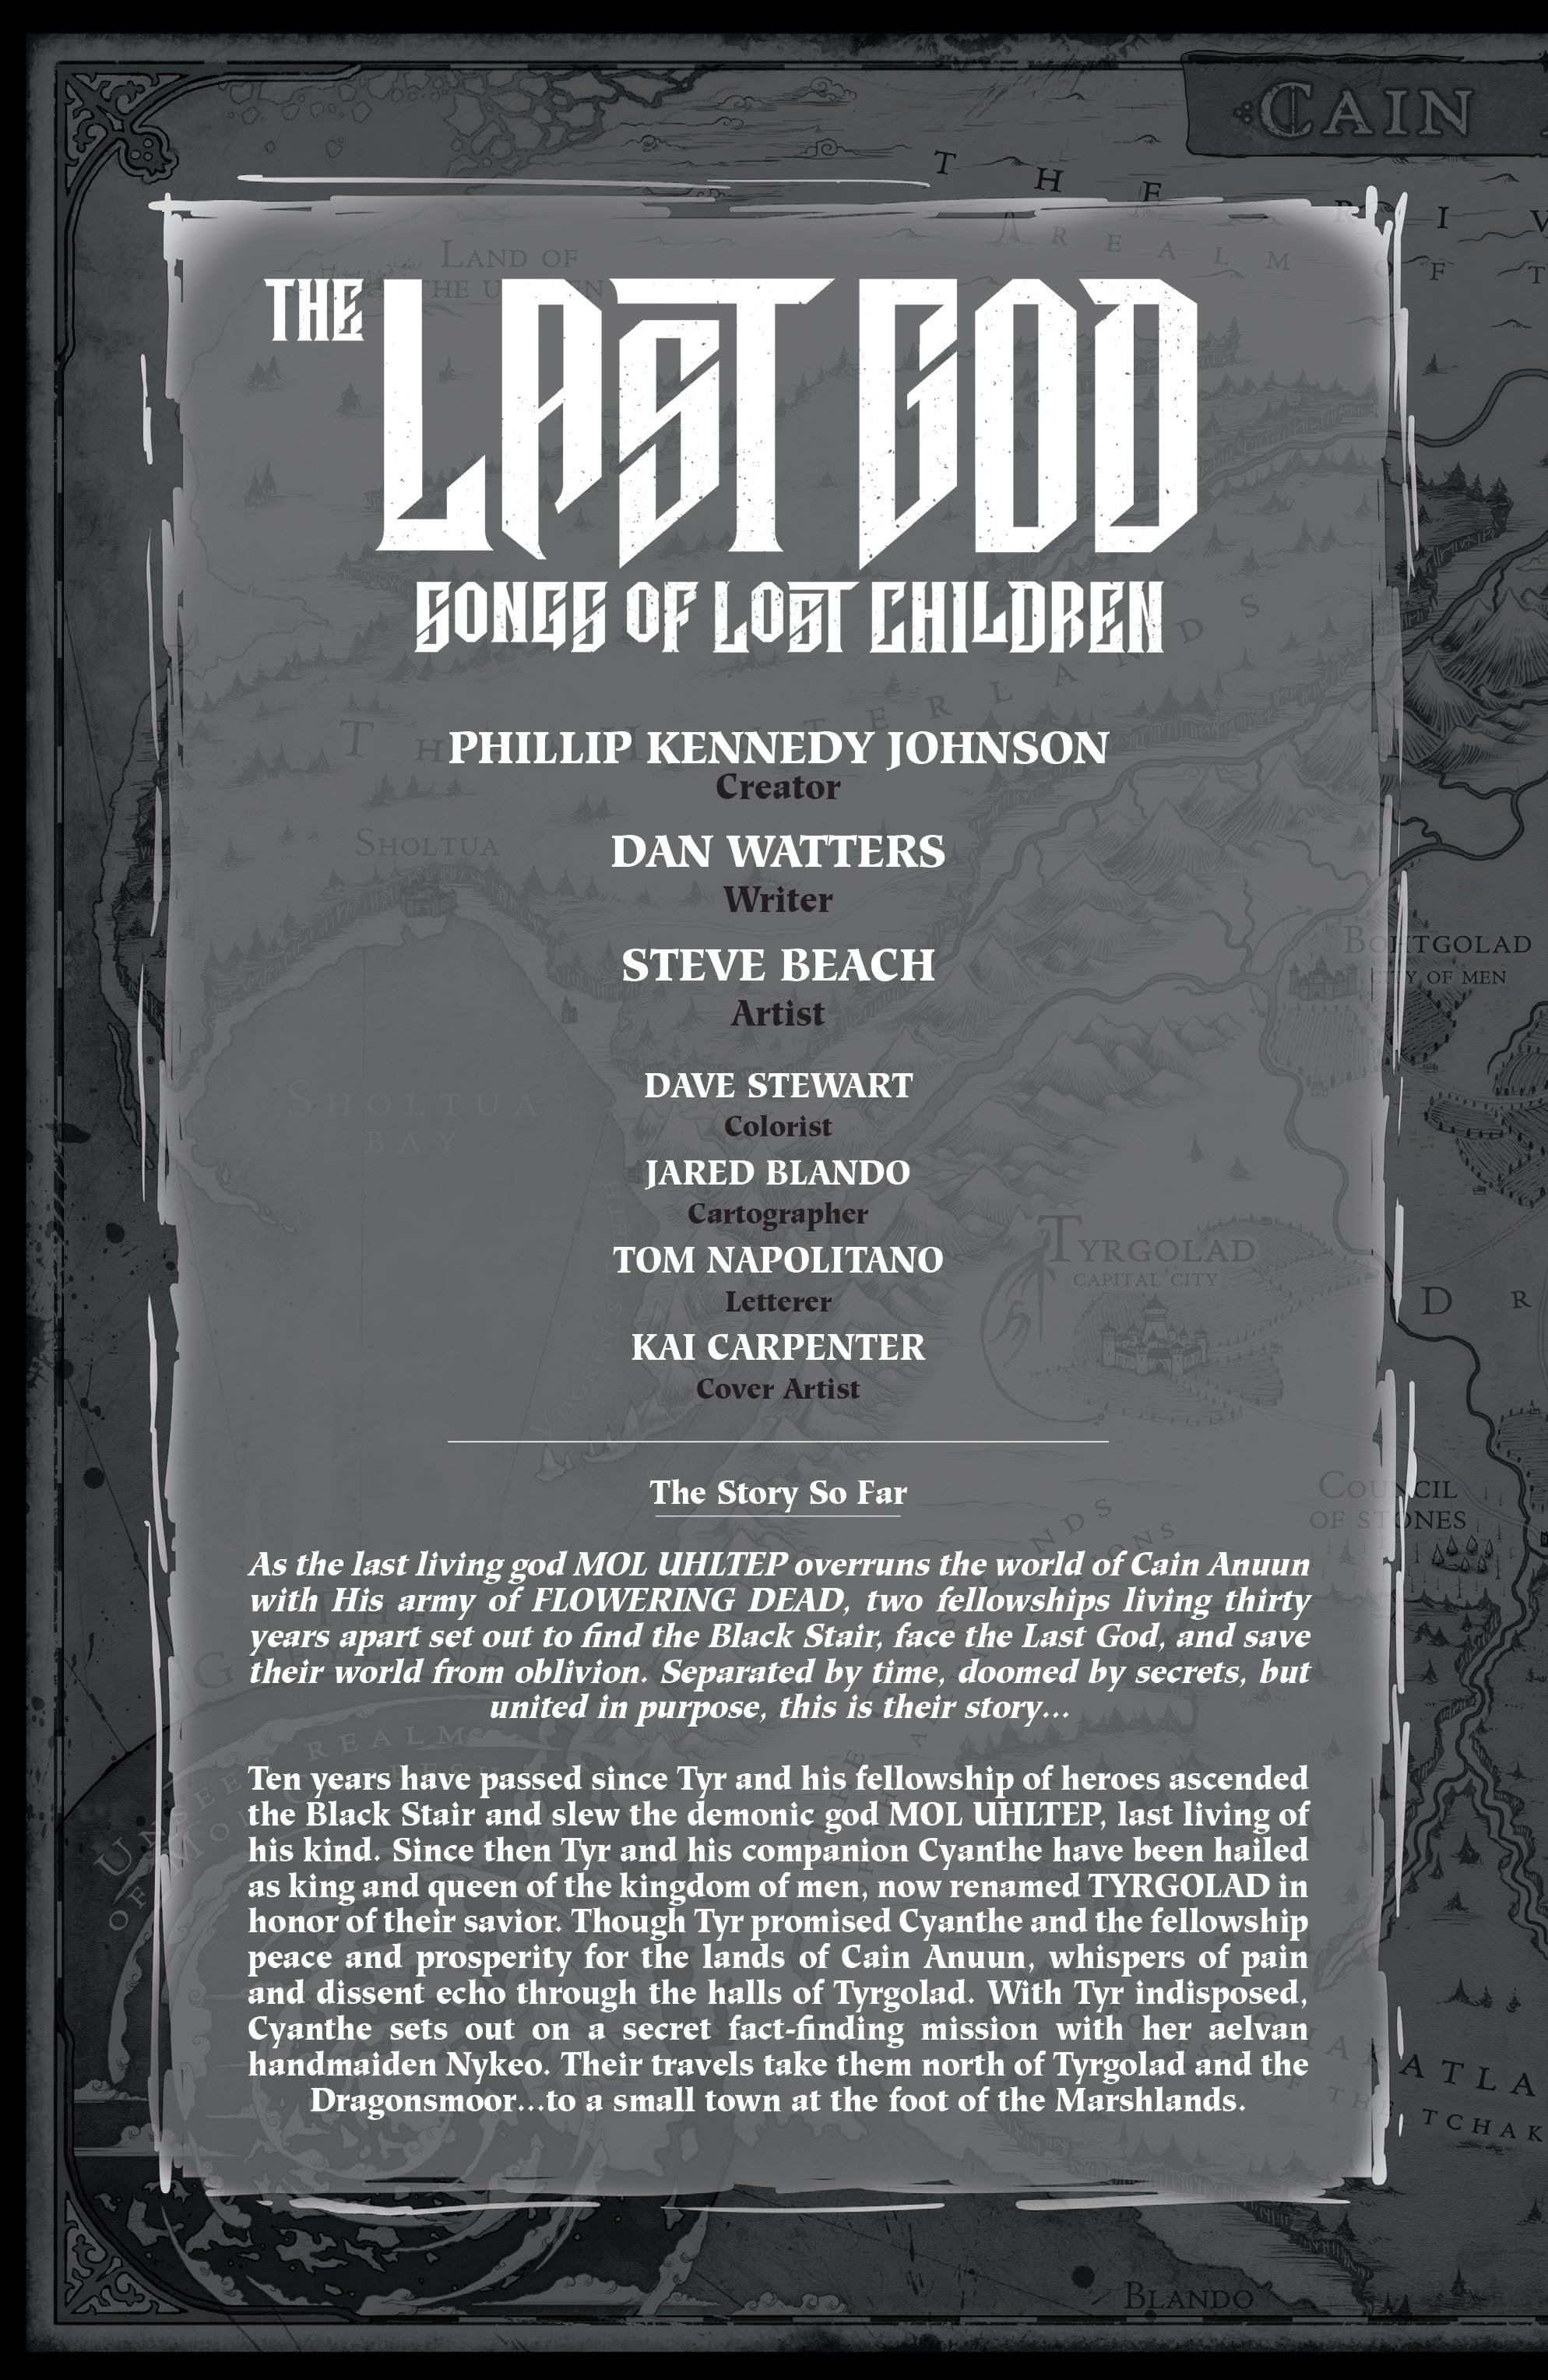 Read online The Last God: Songs of Lost Children comic -  Issue # Full - 2